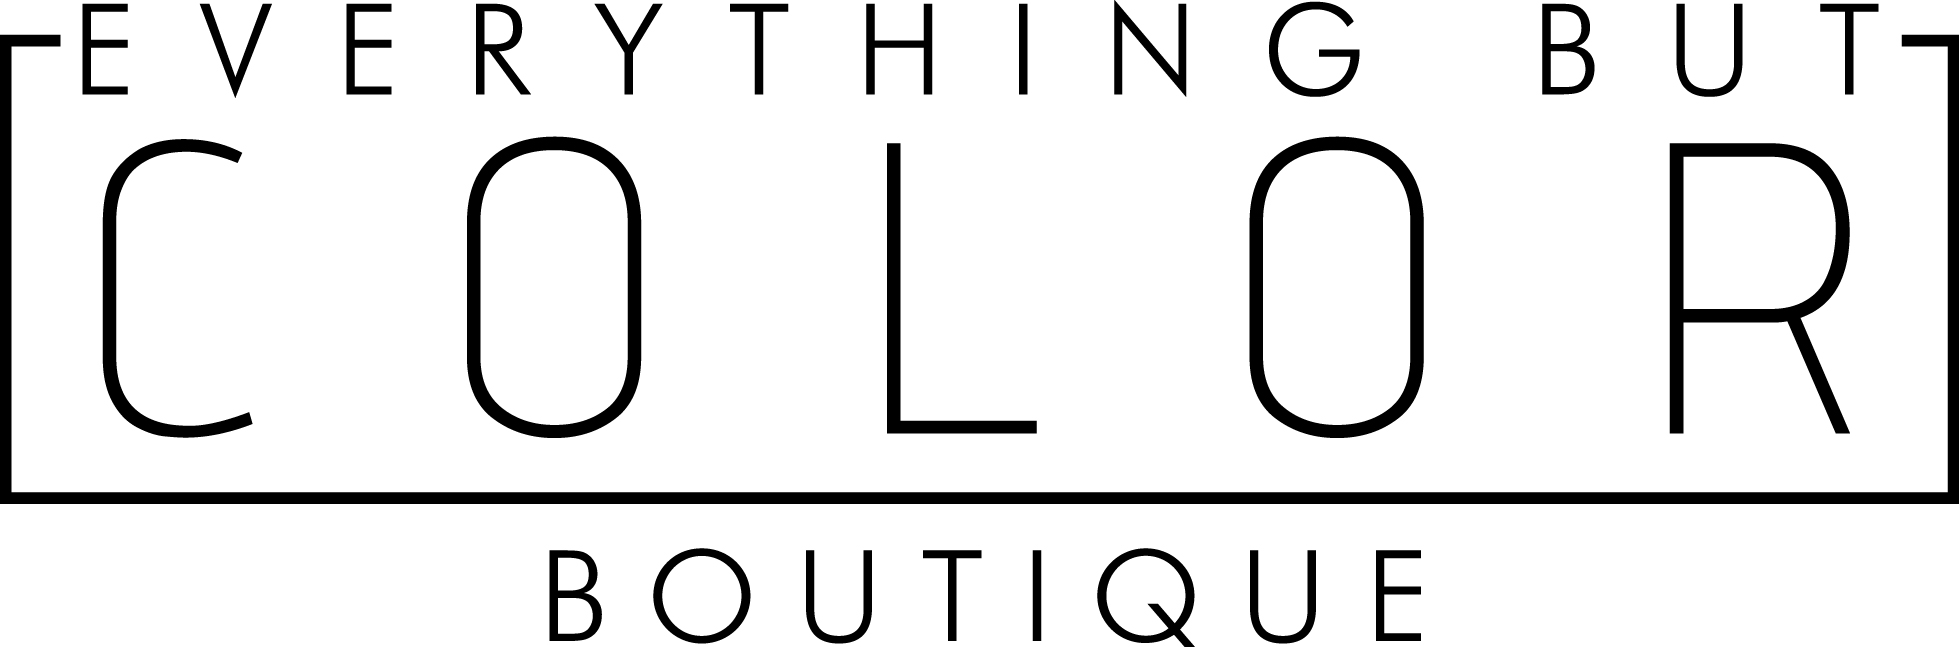 EVERYTHING BUT COLOR Boutique